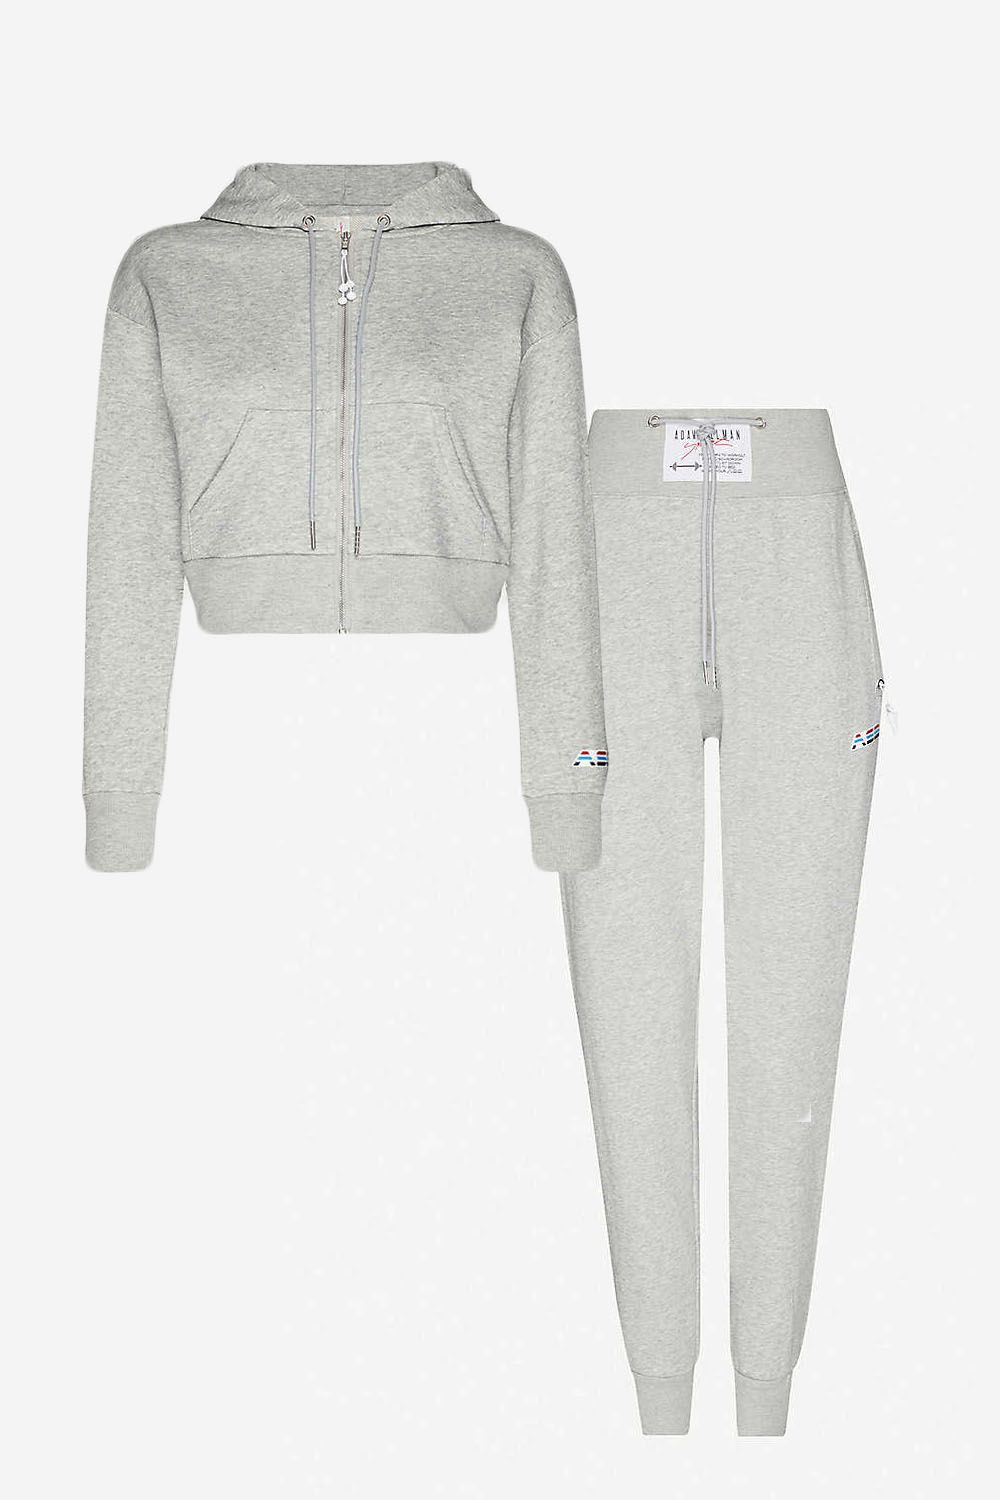 tracksuits for older ladies